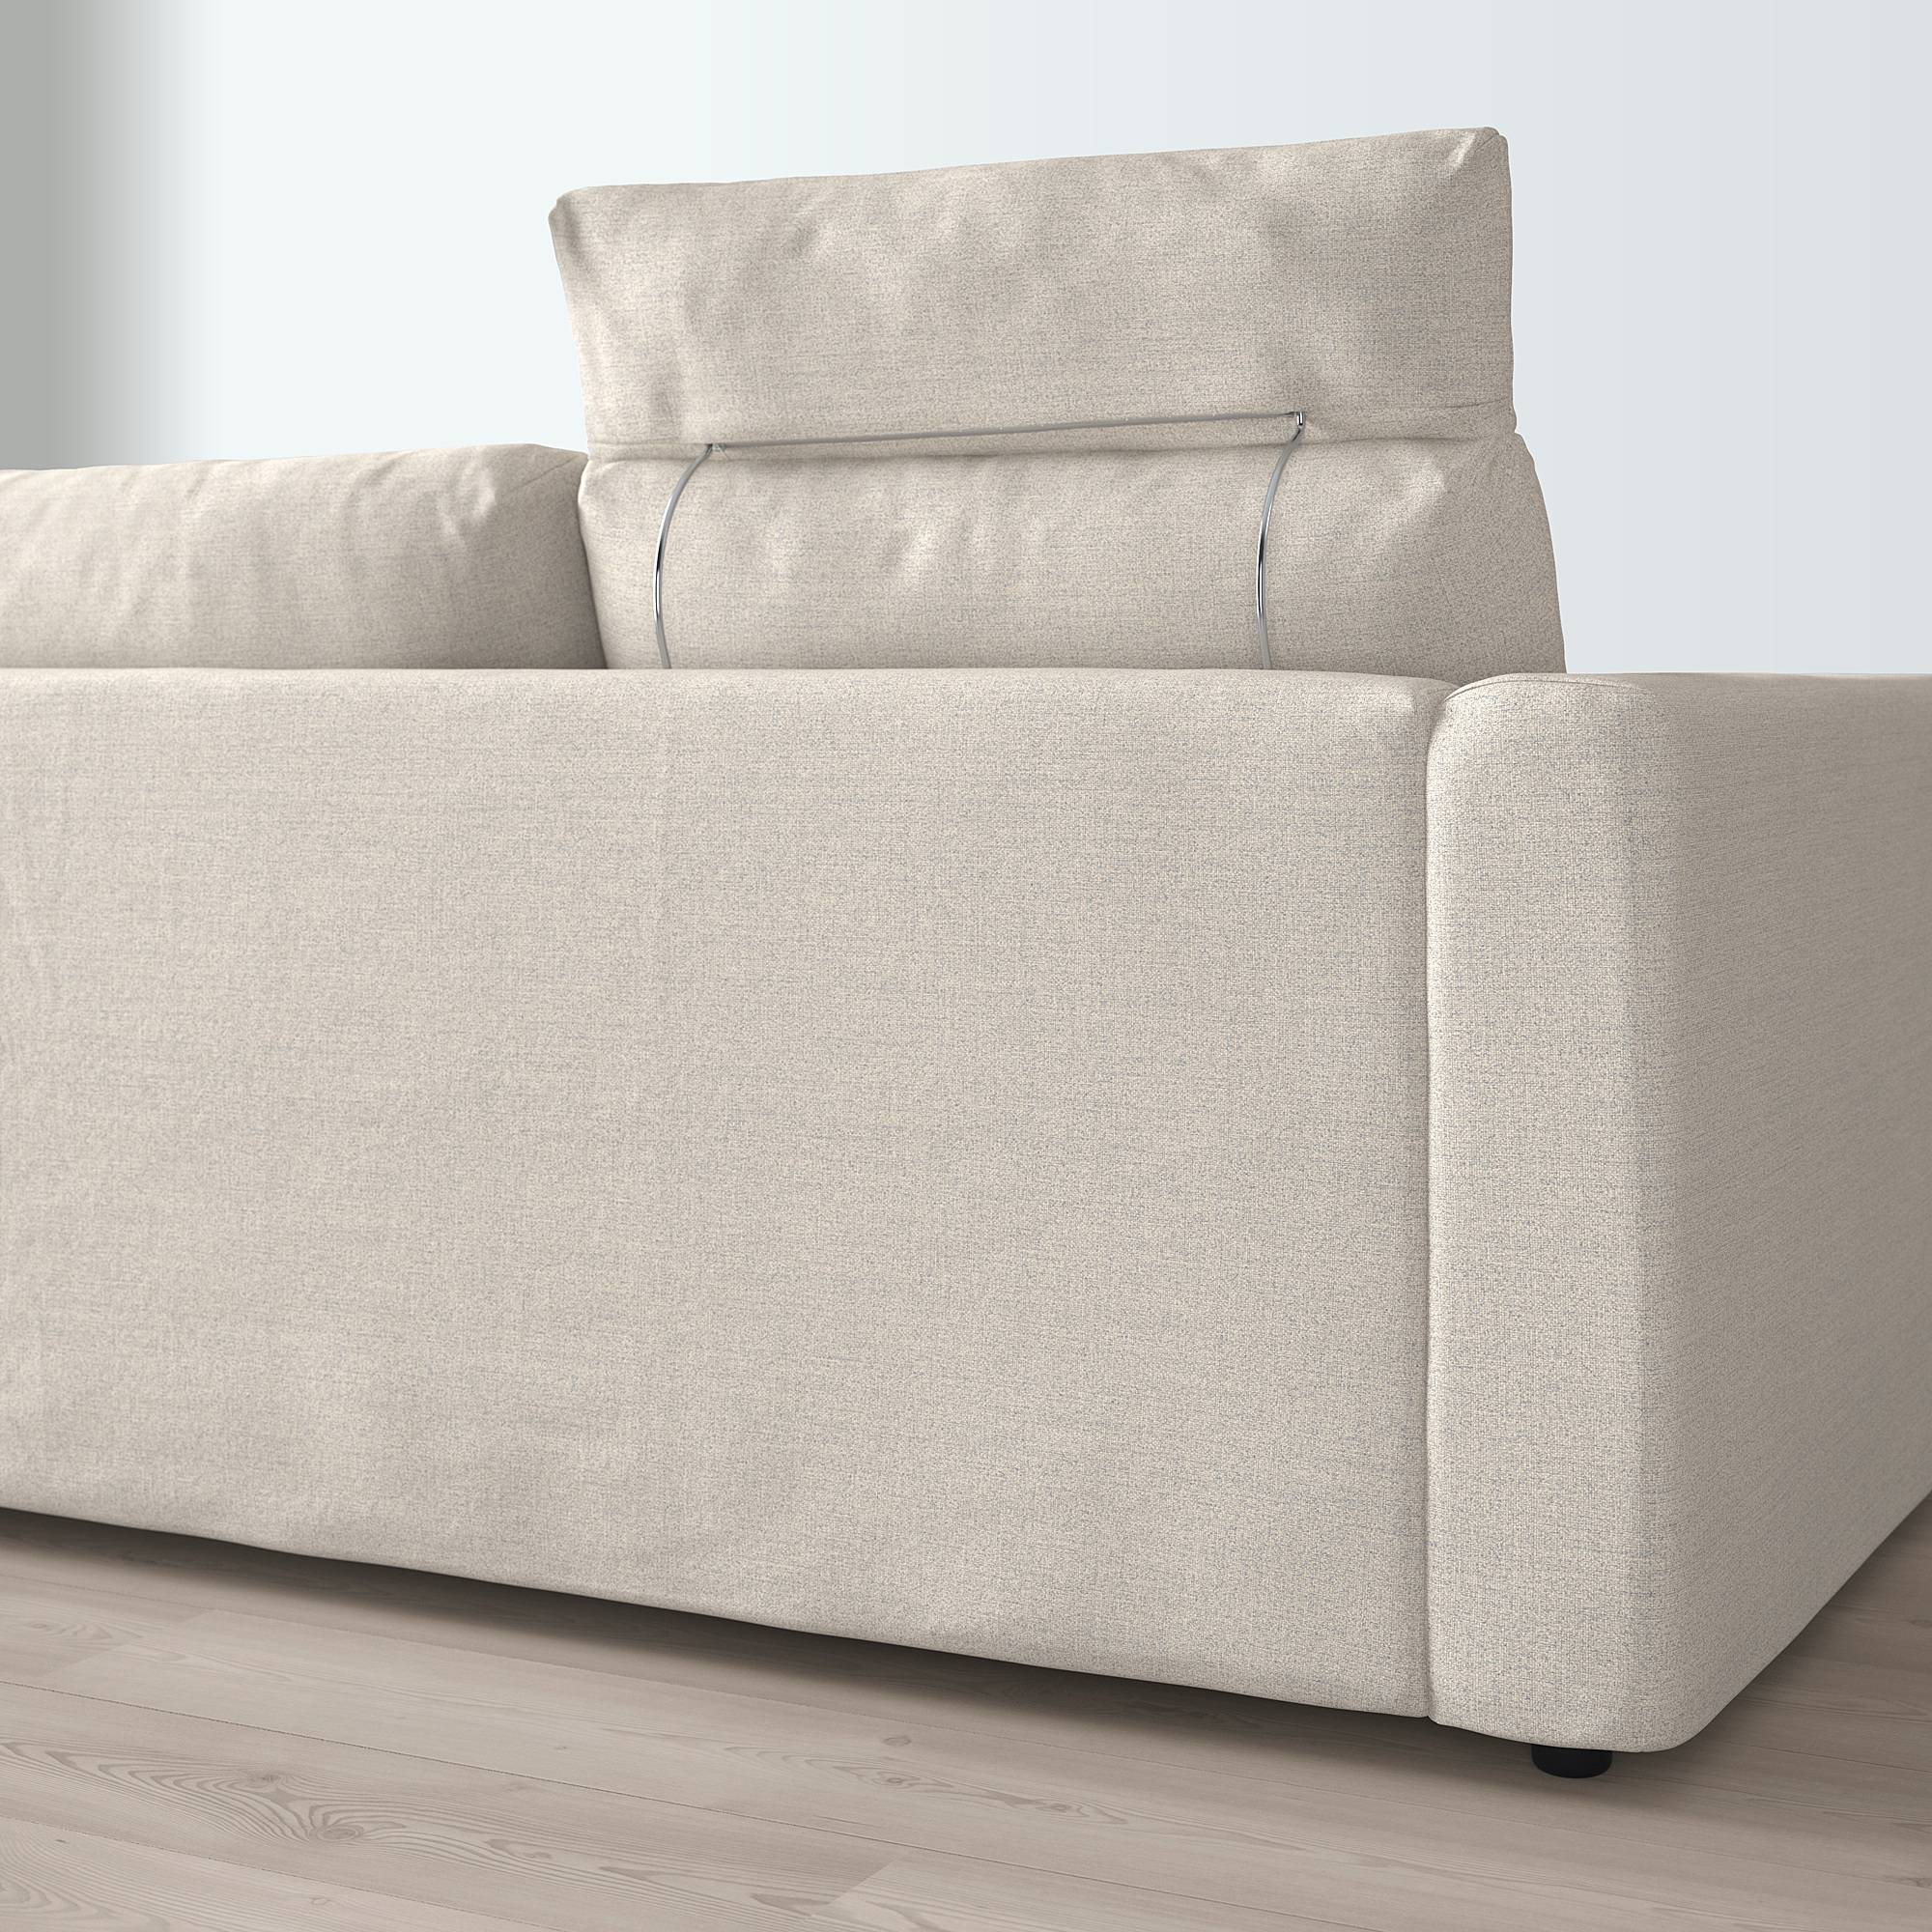 VIMLE 3-seat sofa with chaise longue